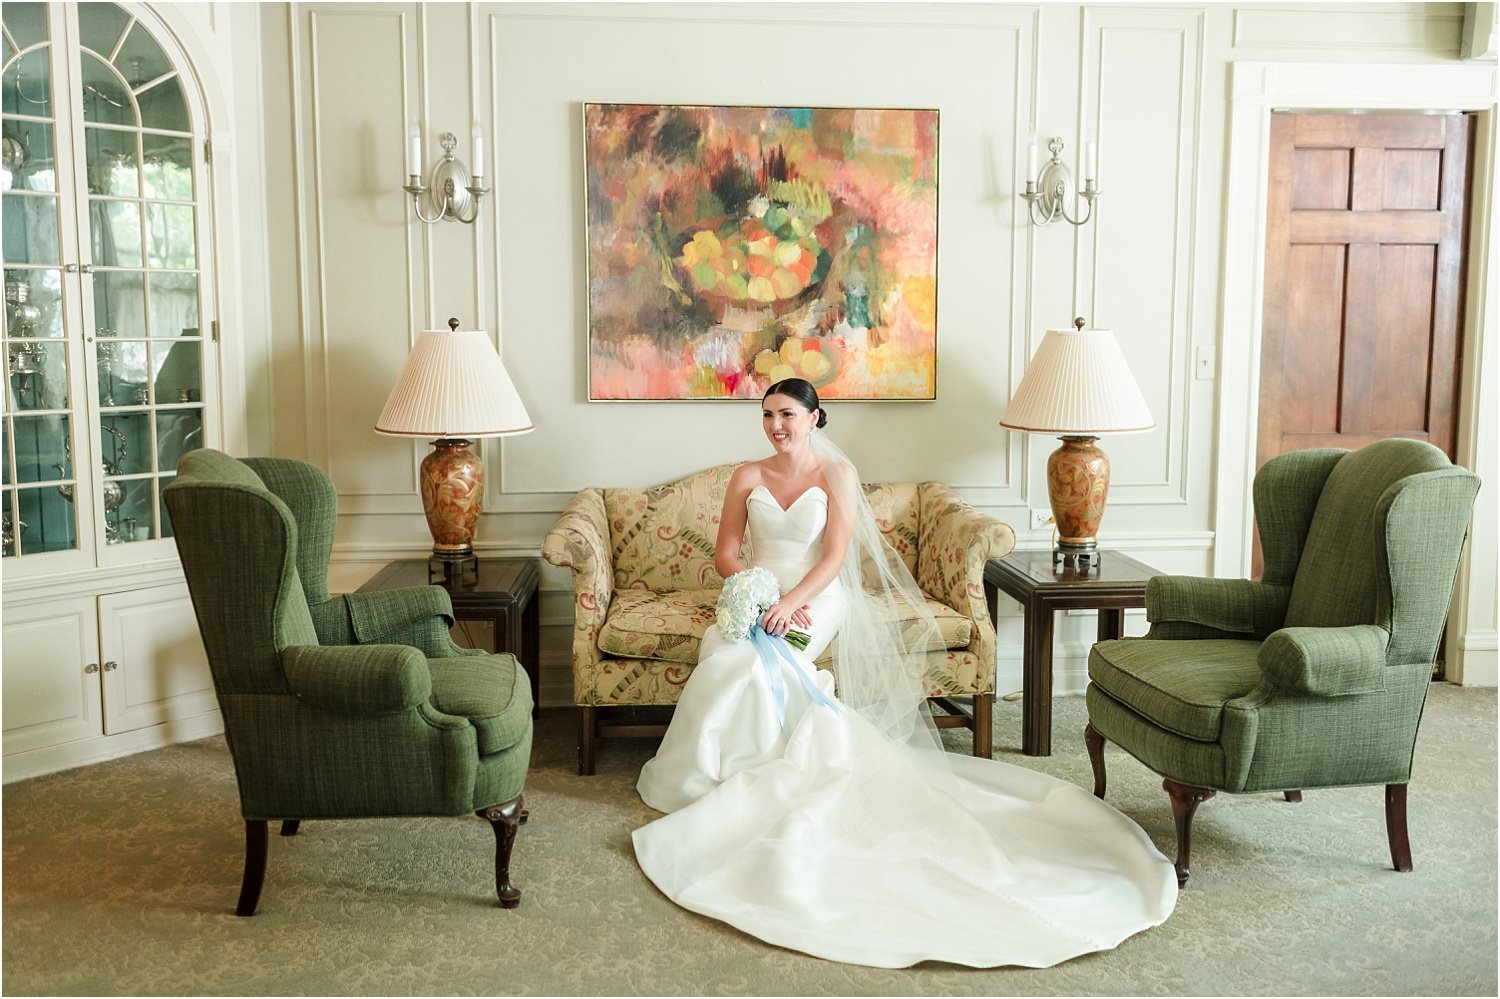  A happy bride sits and talks with her bridesmaids in front of art in a historic wedding venue.  